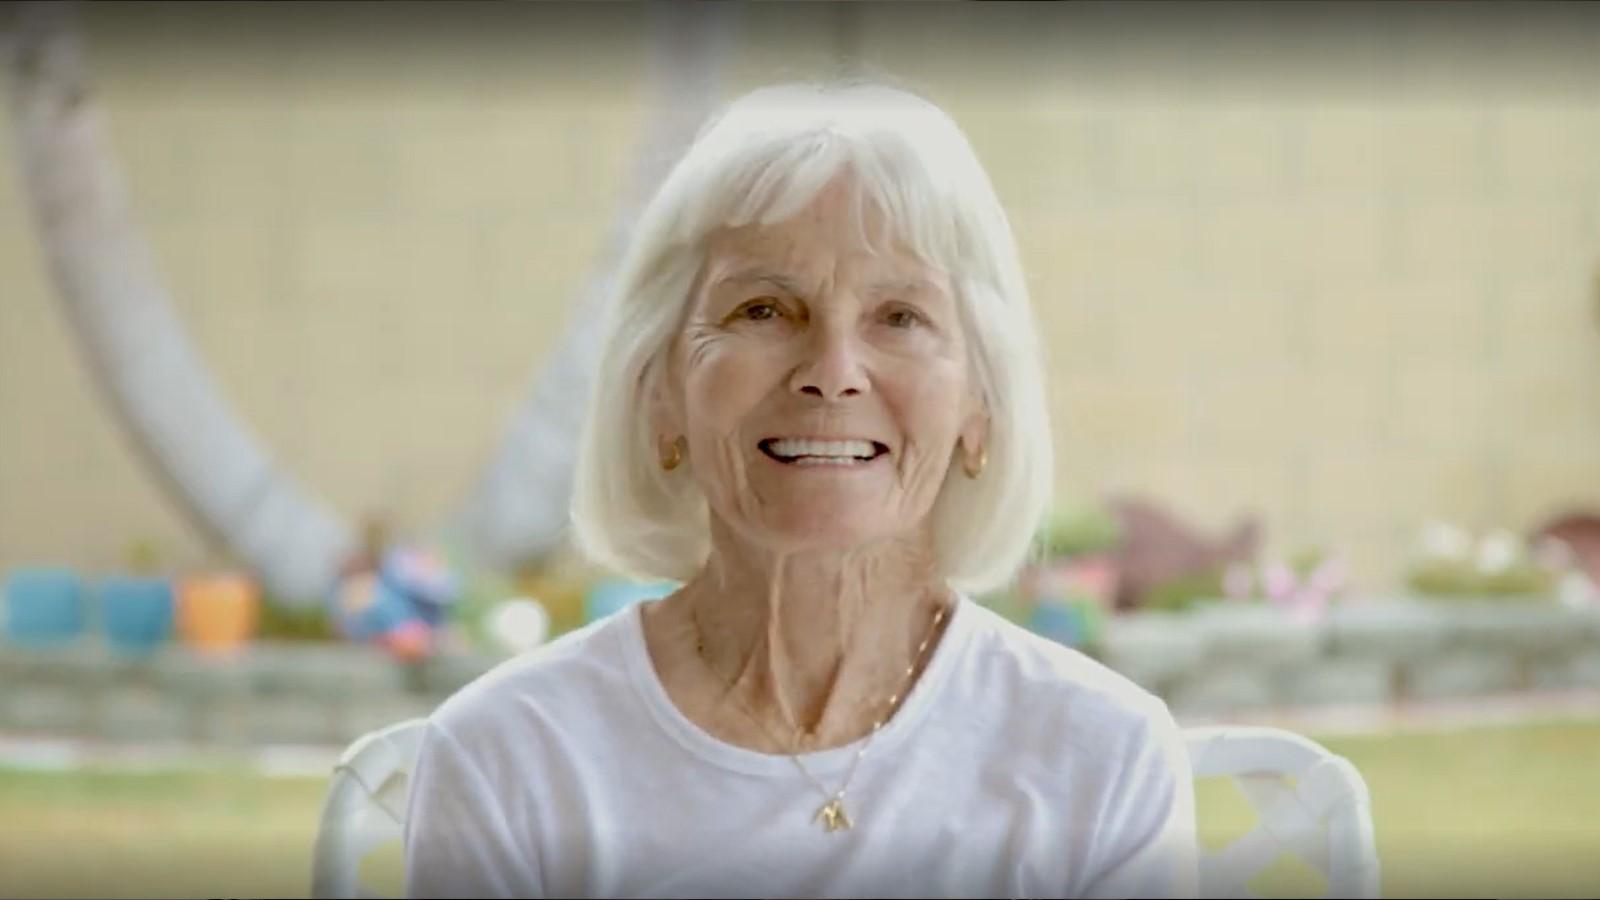 Learn more about Jacqueline, an AFib patient, and her experience with Cardiac Catheter Ablation.